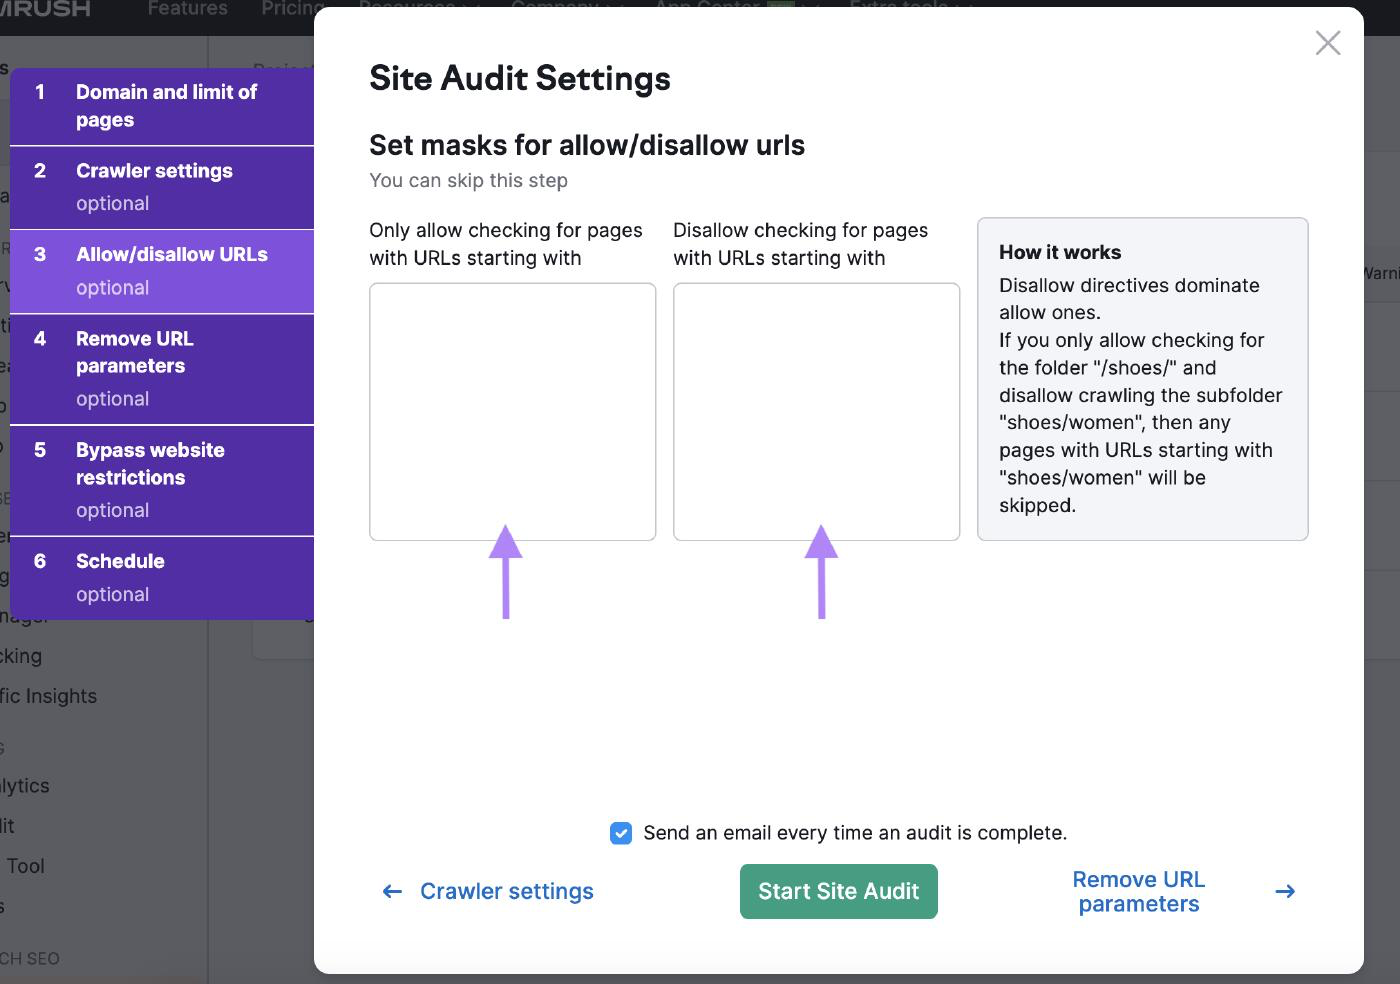 Customize your site audit with allow/disallow URL settings